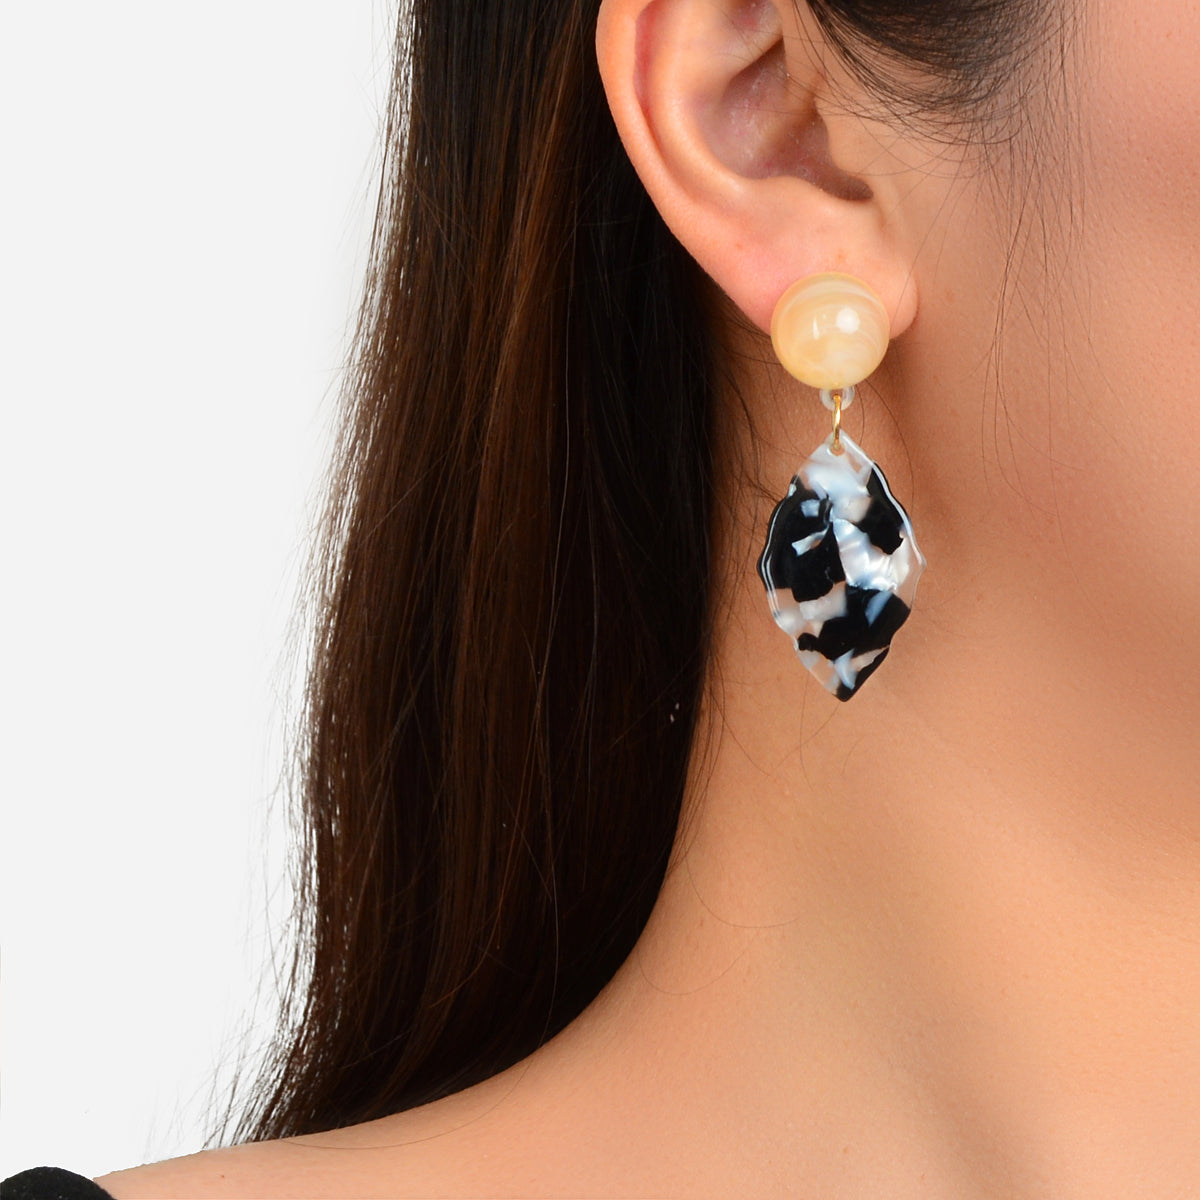 Acrylic Geometric Statement Earrings - Mottled Resin Lightweight Dangle Earrings for Party or Vacation